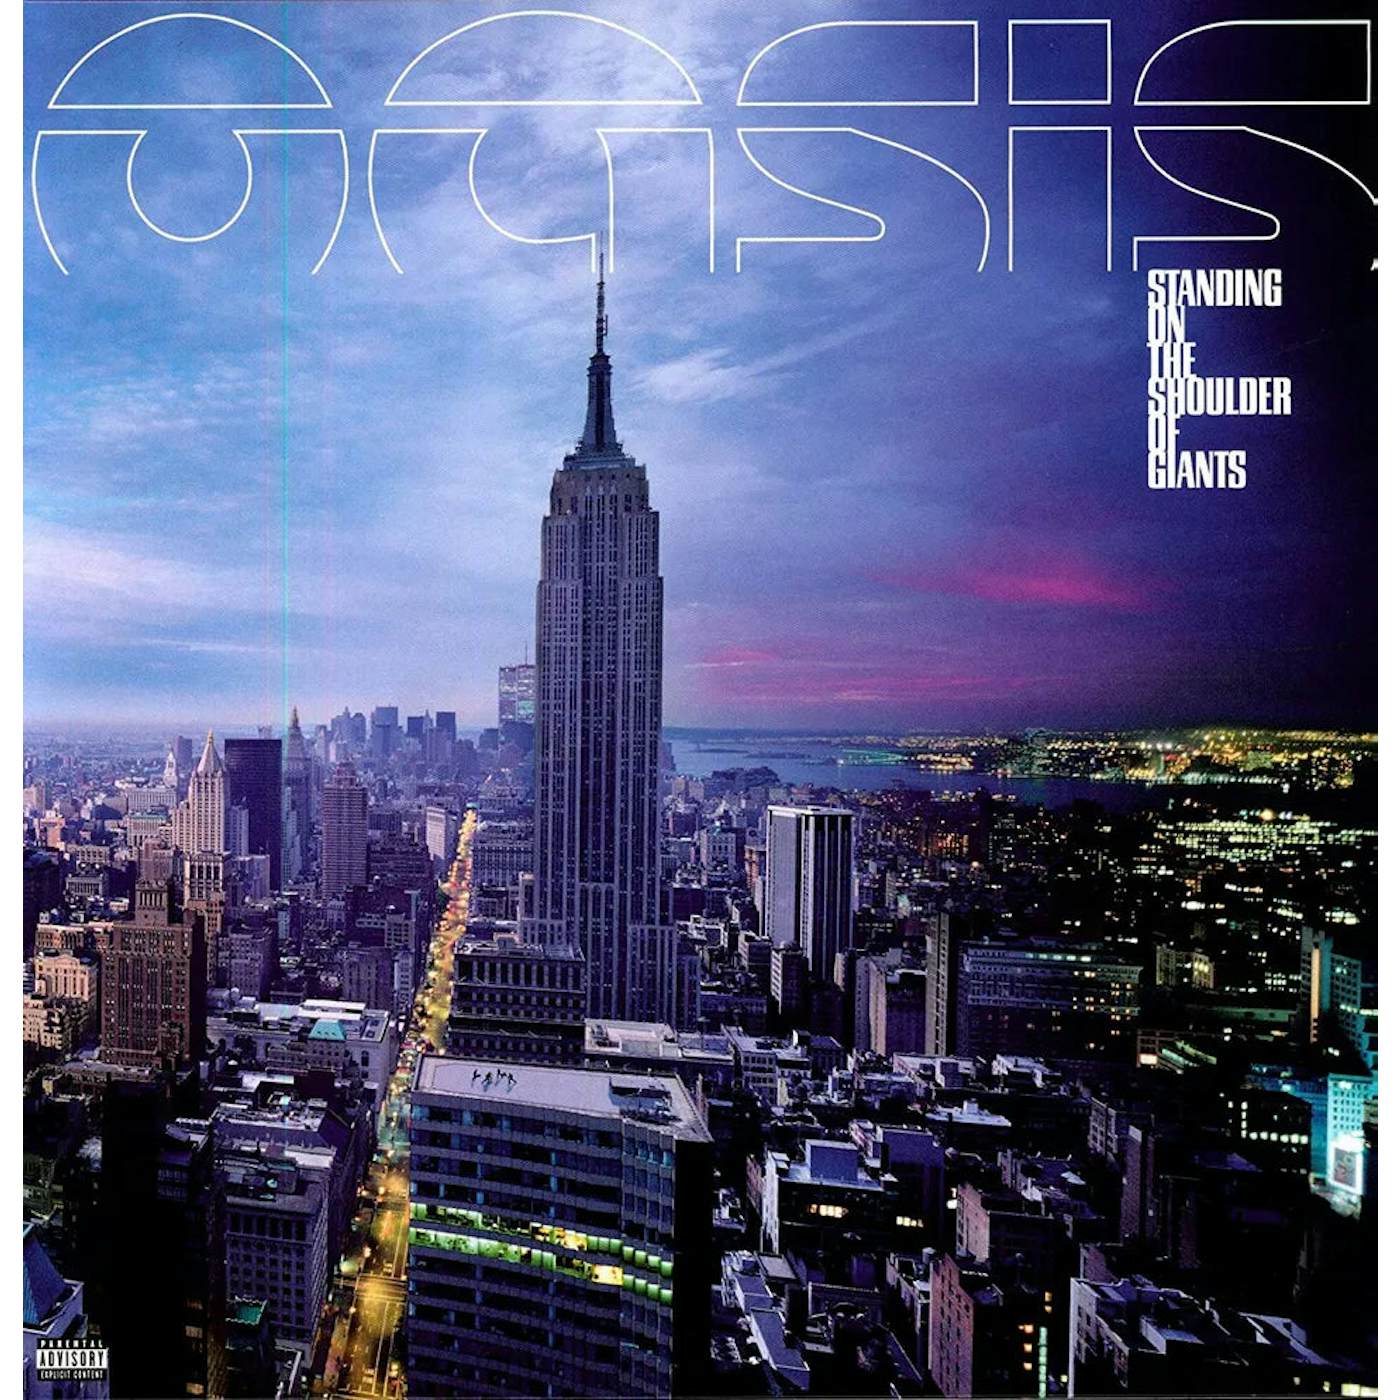 Oasis - Standing on the Shoulder of Giant (Vinyl)